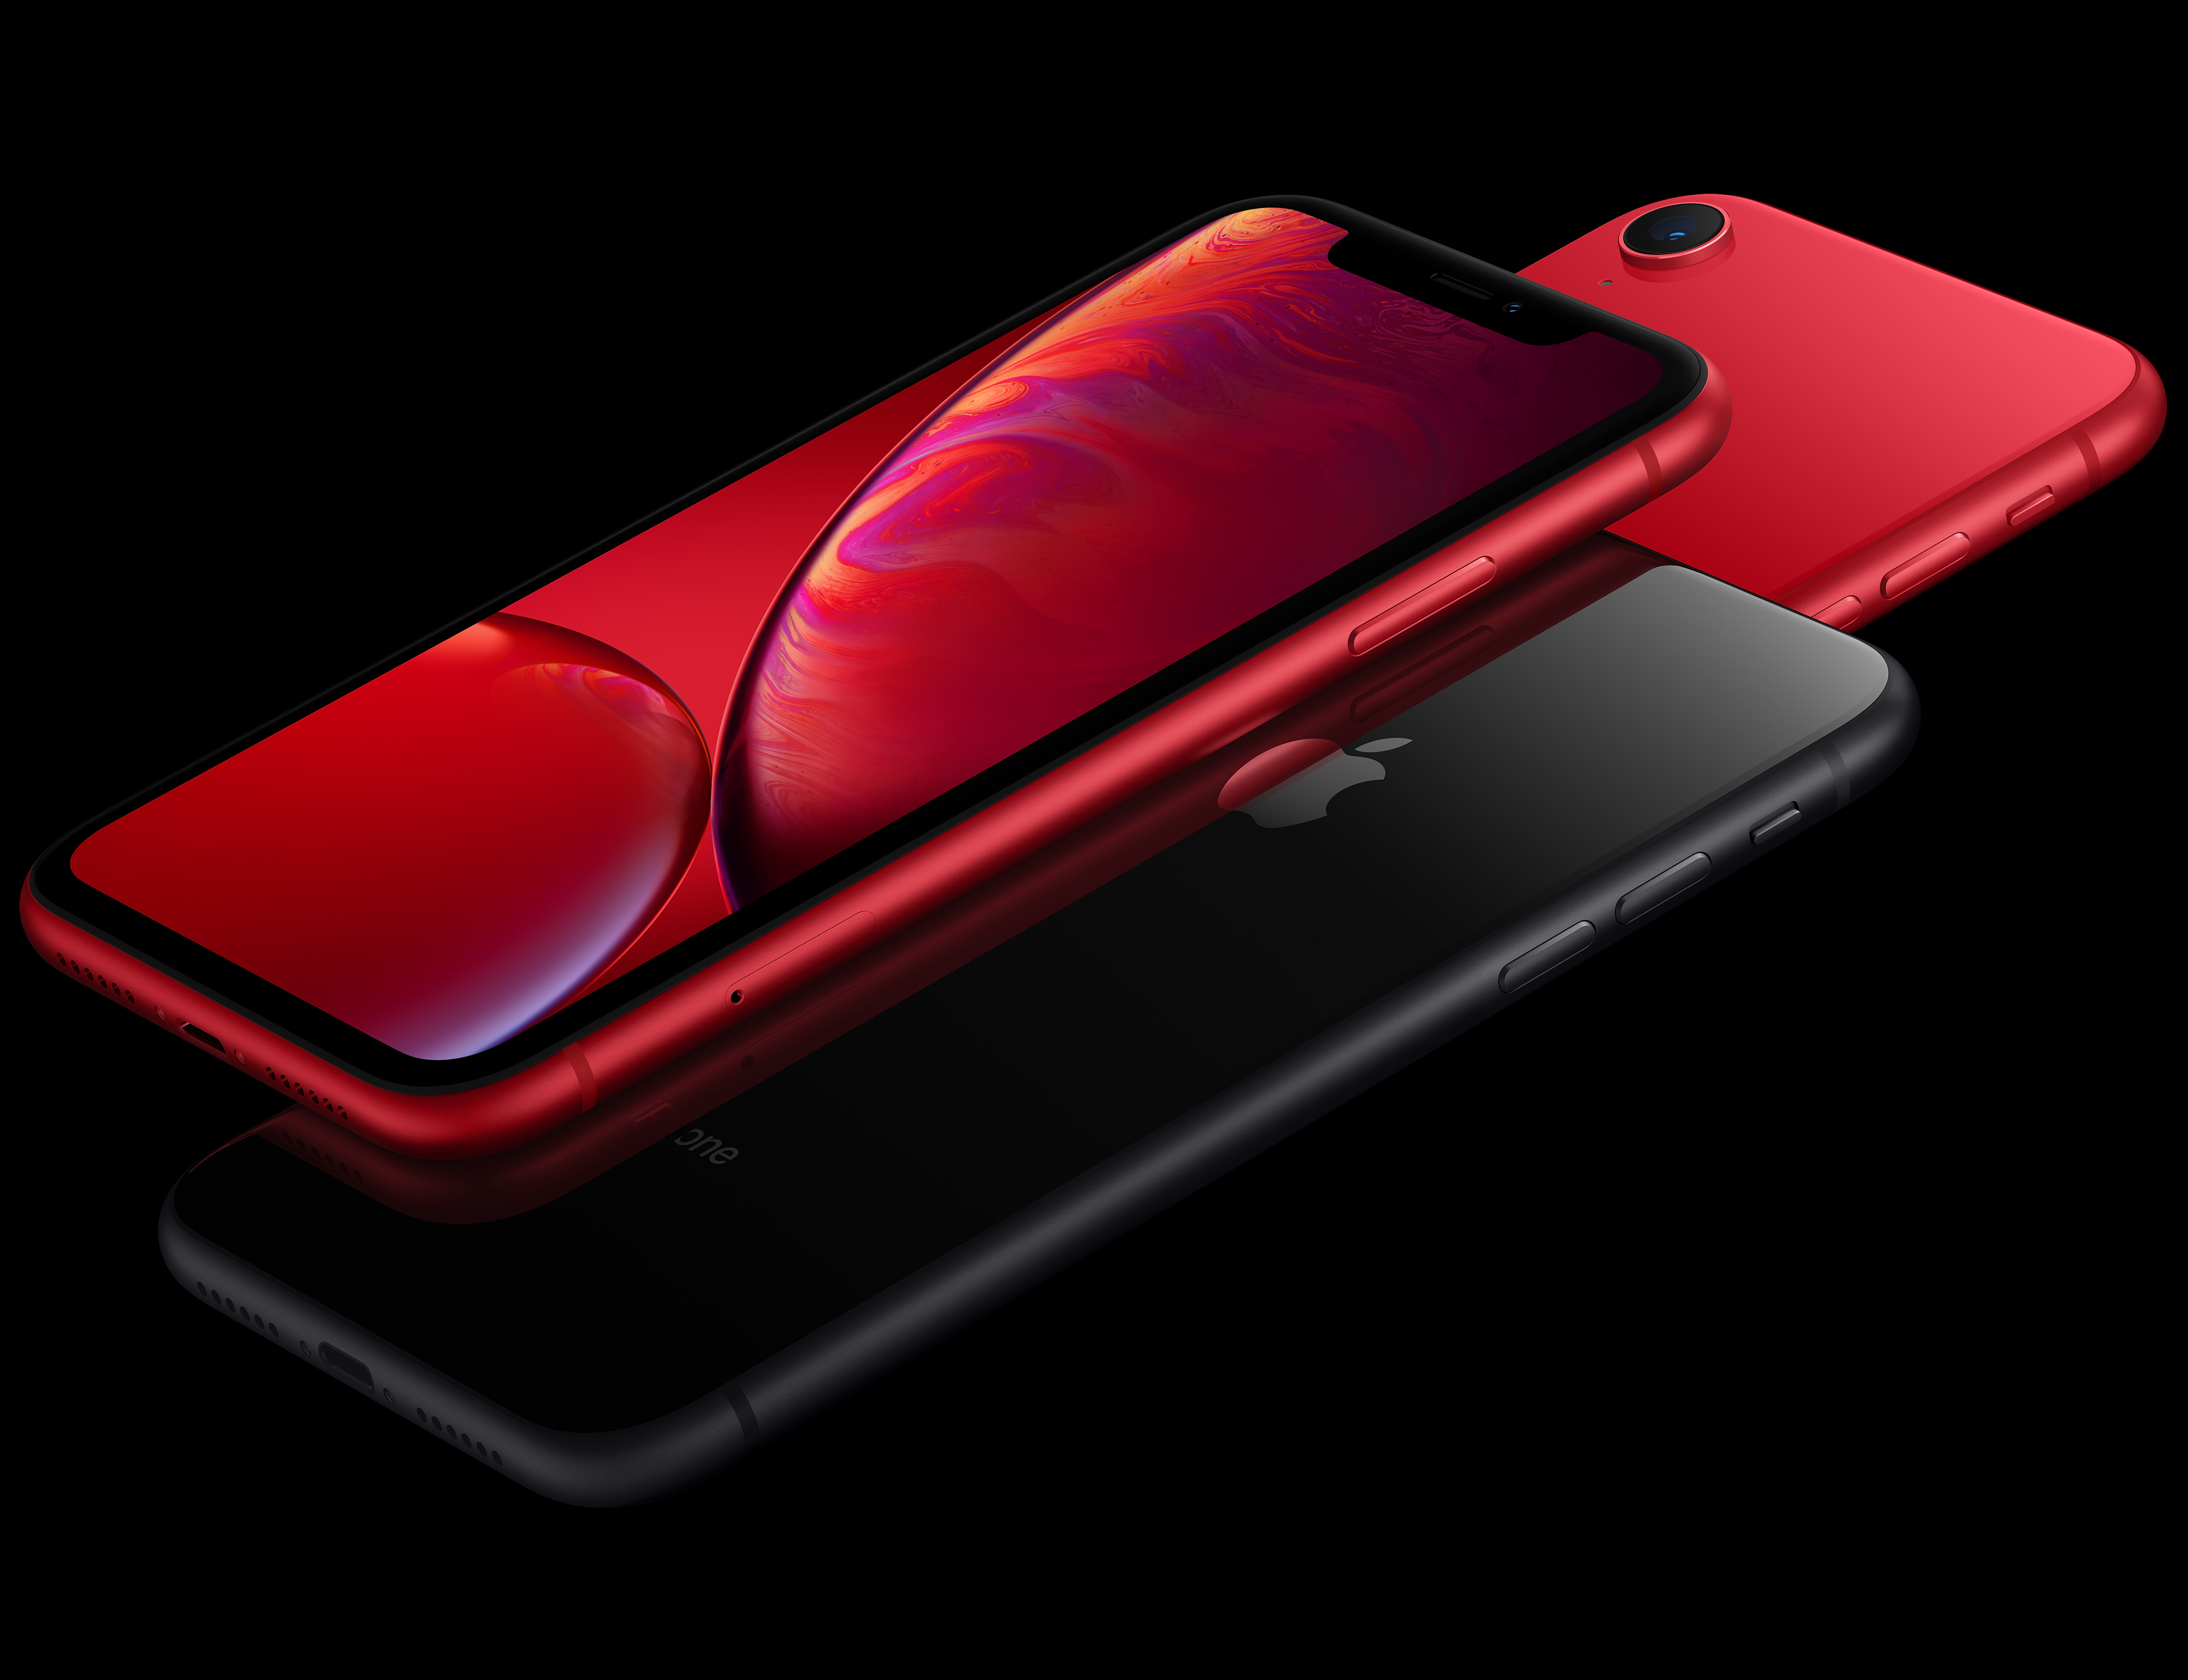 iPhone XR、Haptic touch